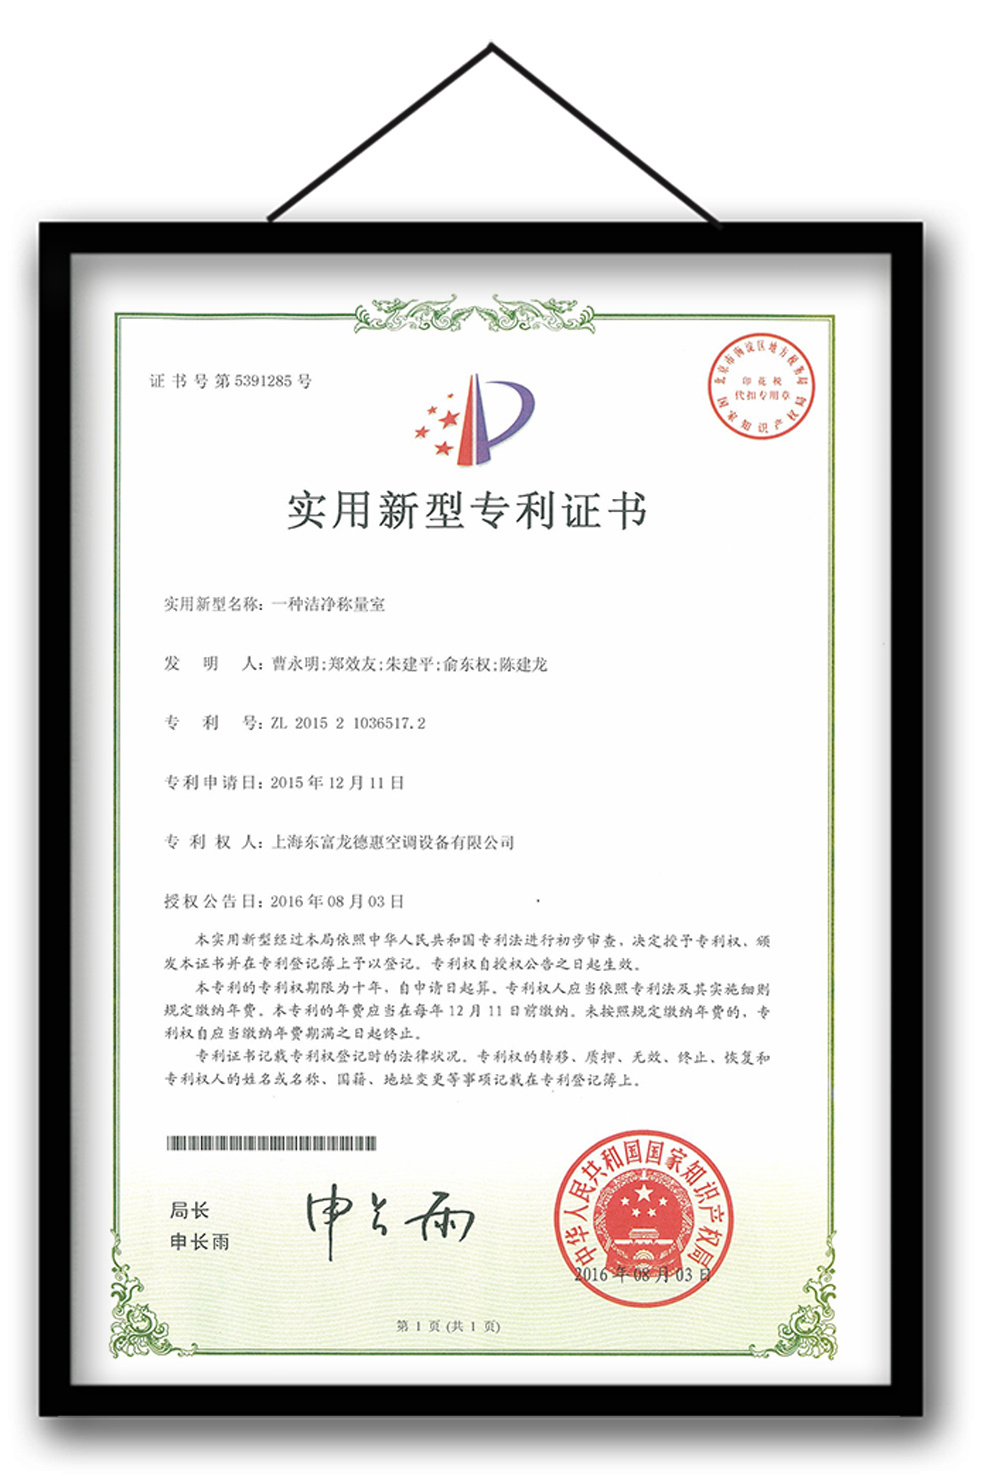 Patent certificate for a clean weighing chamber